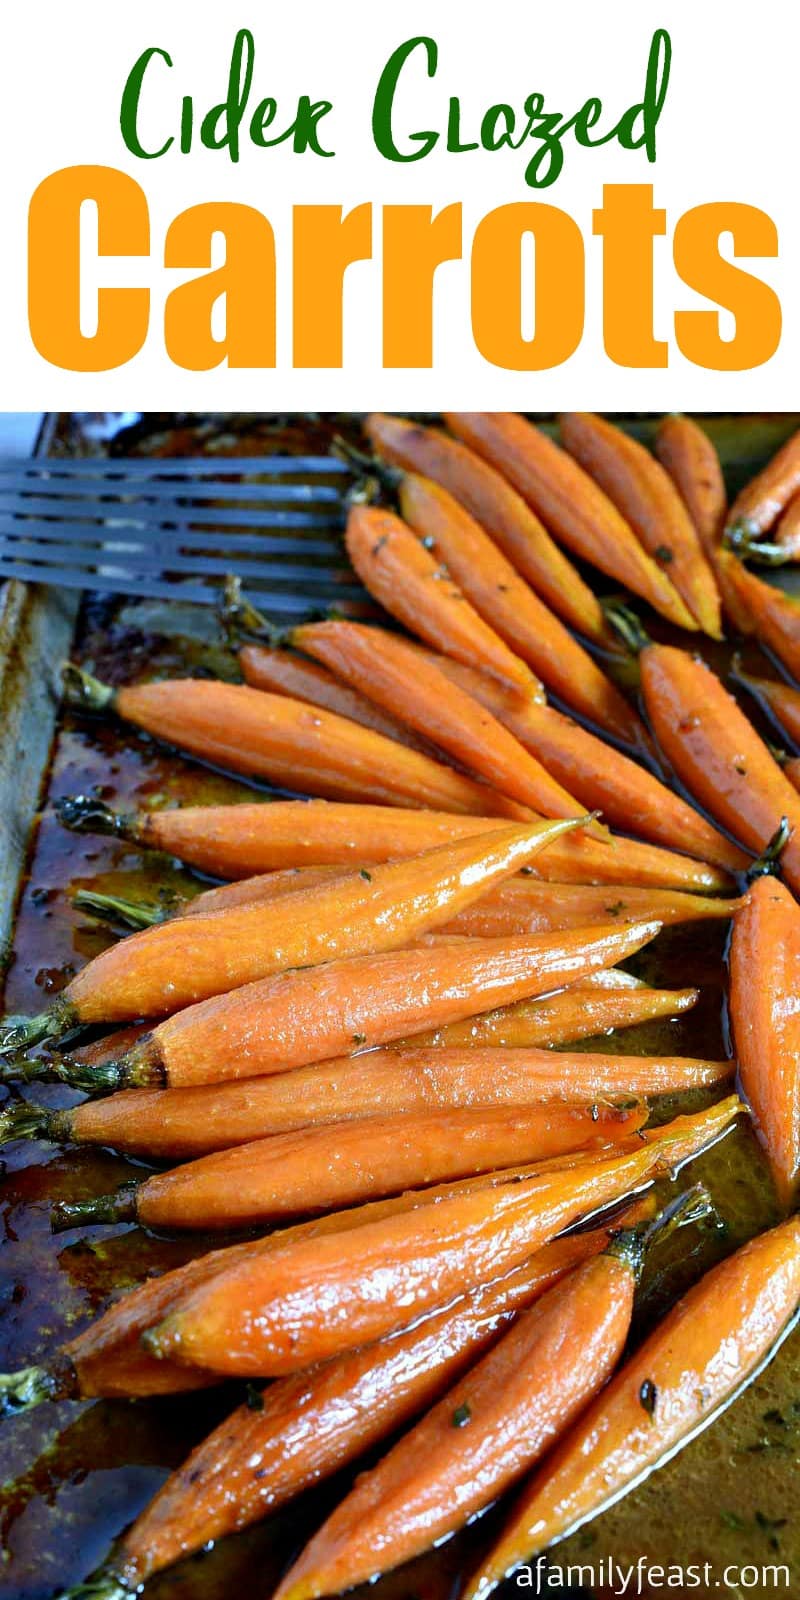 Cider Glazed Carrots - Apple cider, brown sugar, mustard and thyme create a simple, tasty carrot side dish that is the perfect addition to any meal! 